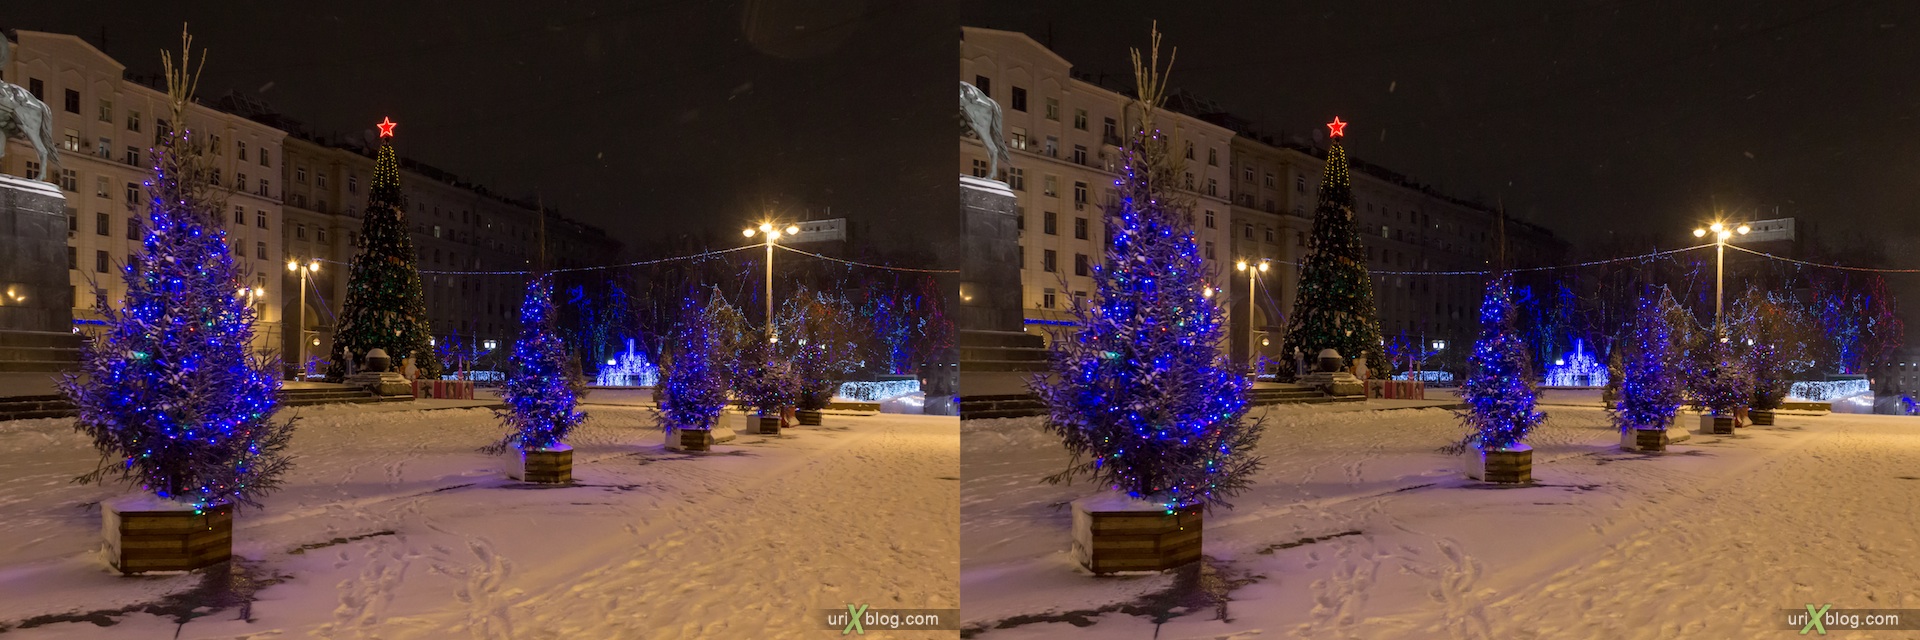 2013, Moscow, Tverskaja square, night, fountain, snow, winter, new year, christmass tree, city, Russia, 3D, stereo pair, cross-eyed, crossview, cross view stereo pair